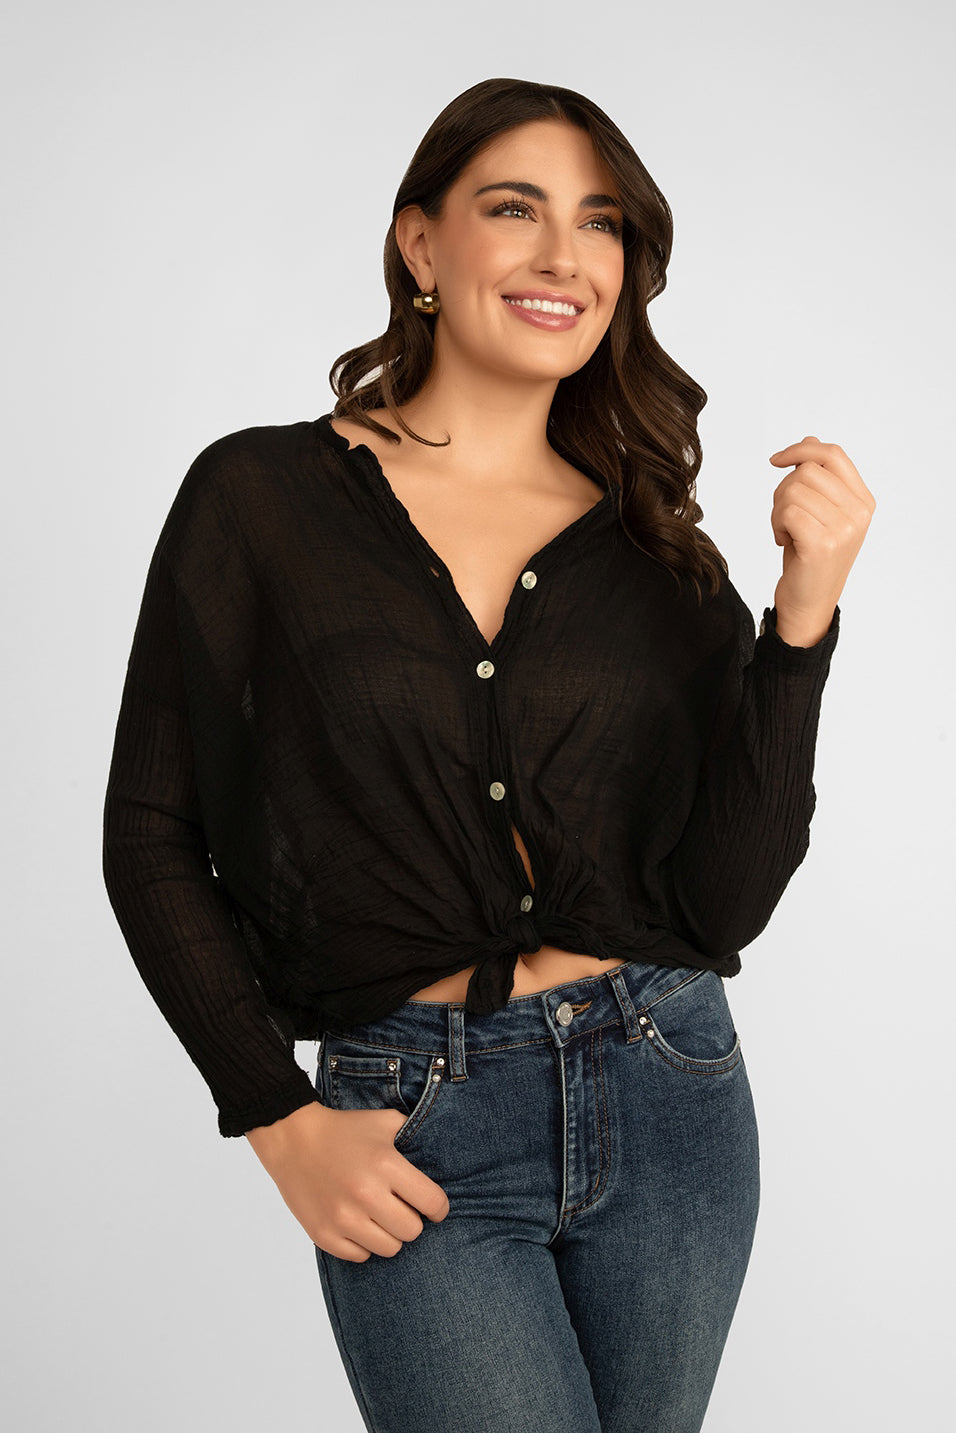 Julietta (10-A3320-M2) Women's Long Sleeve Button up Tie Front Blouse with Split V-Neck in Black